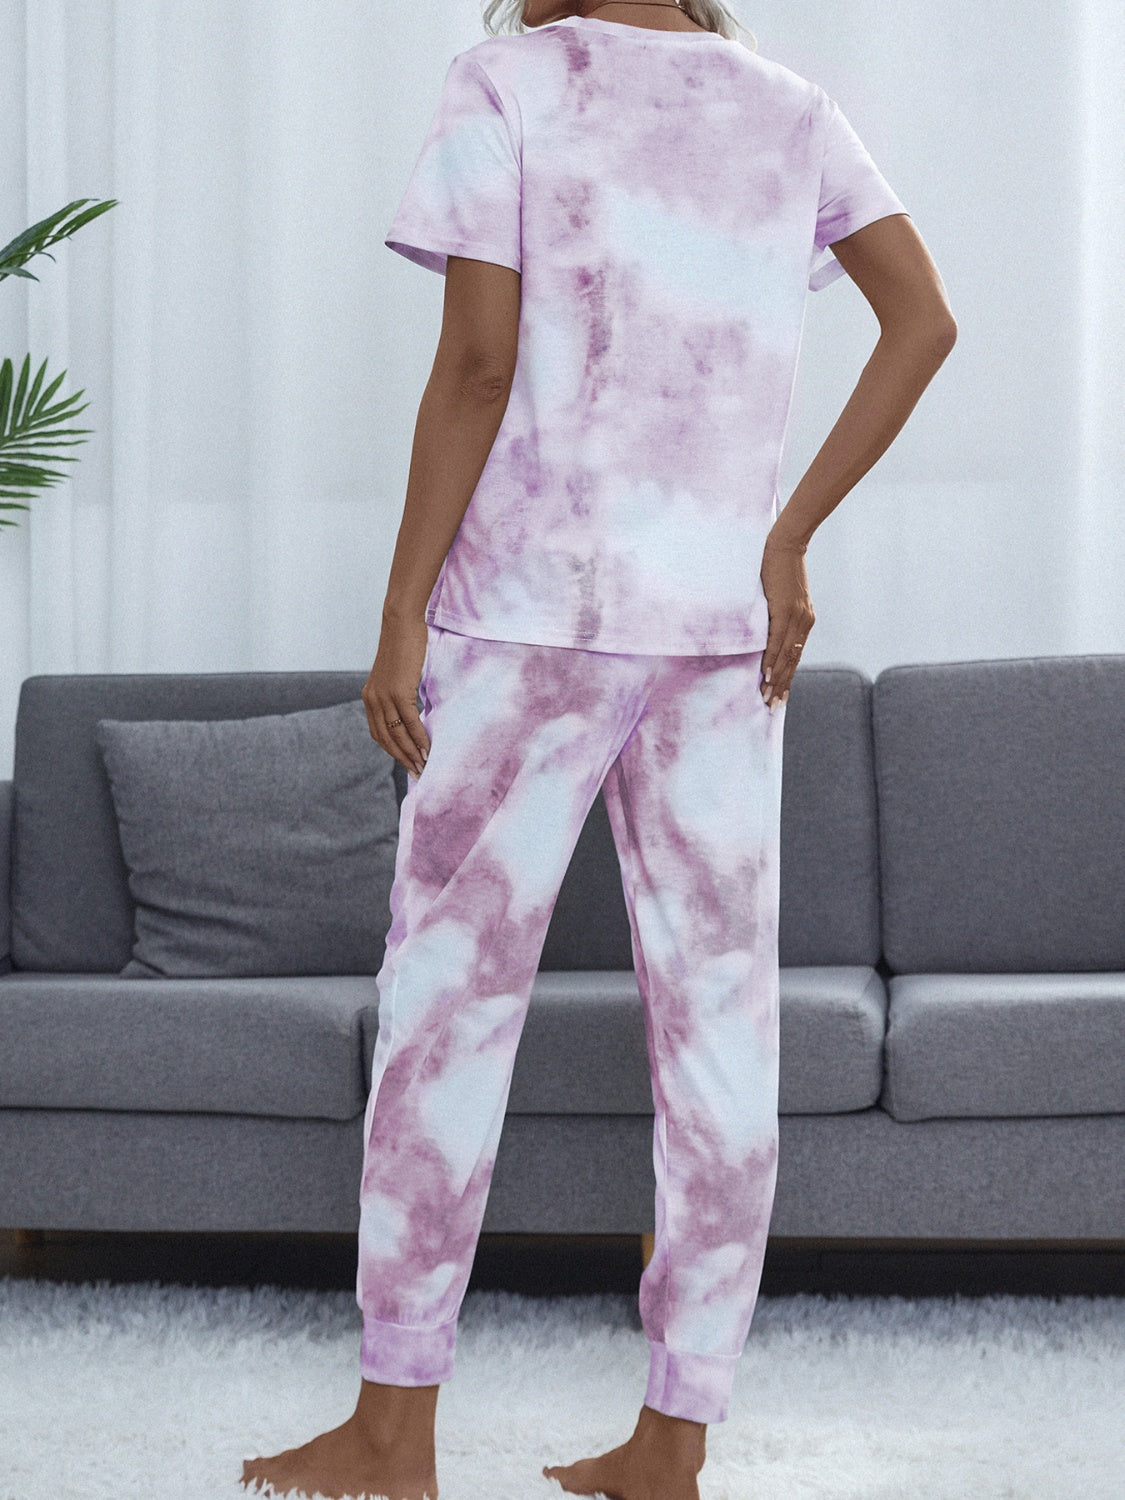 Cozy up in style with our purple tie-dye lounge set, perfect for relaxing days or casual outings. Comfort meets chic in every wear.